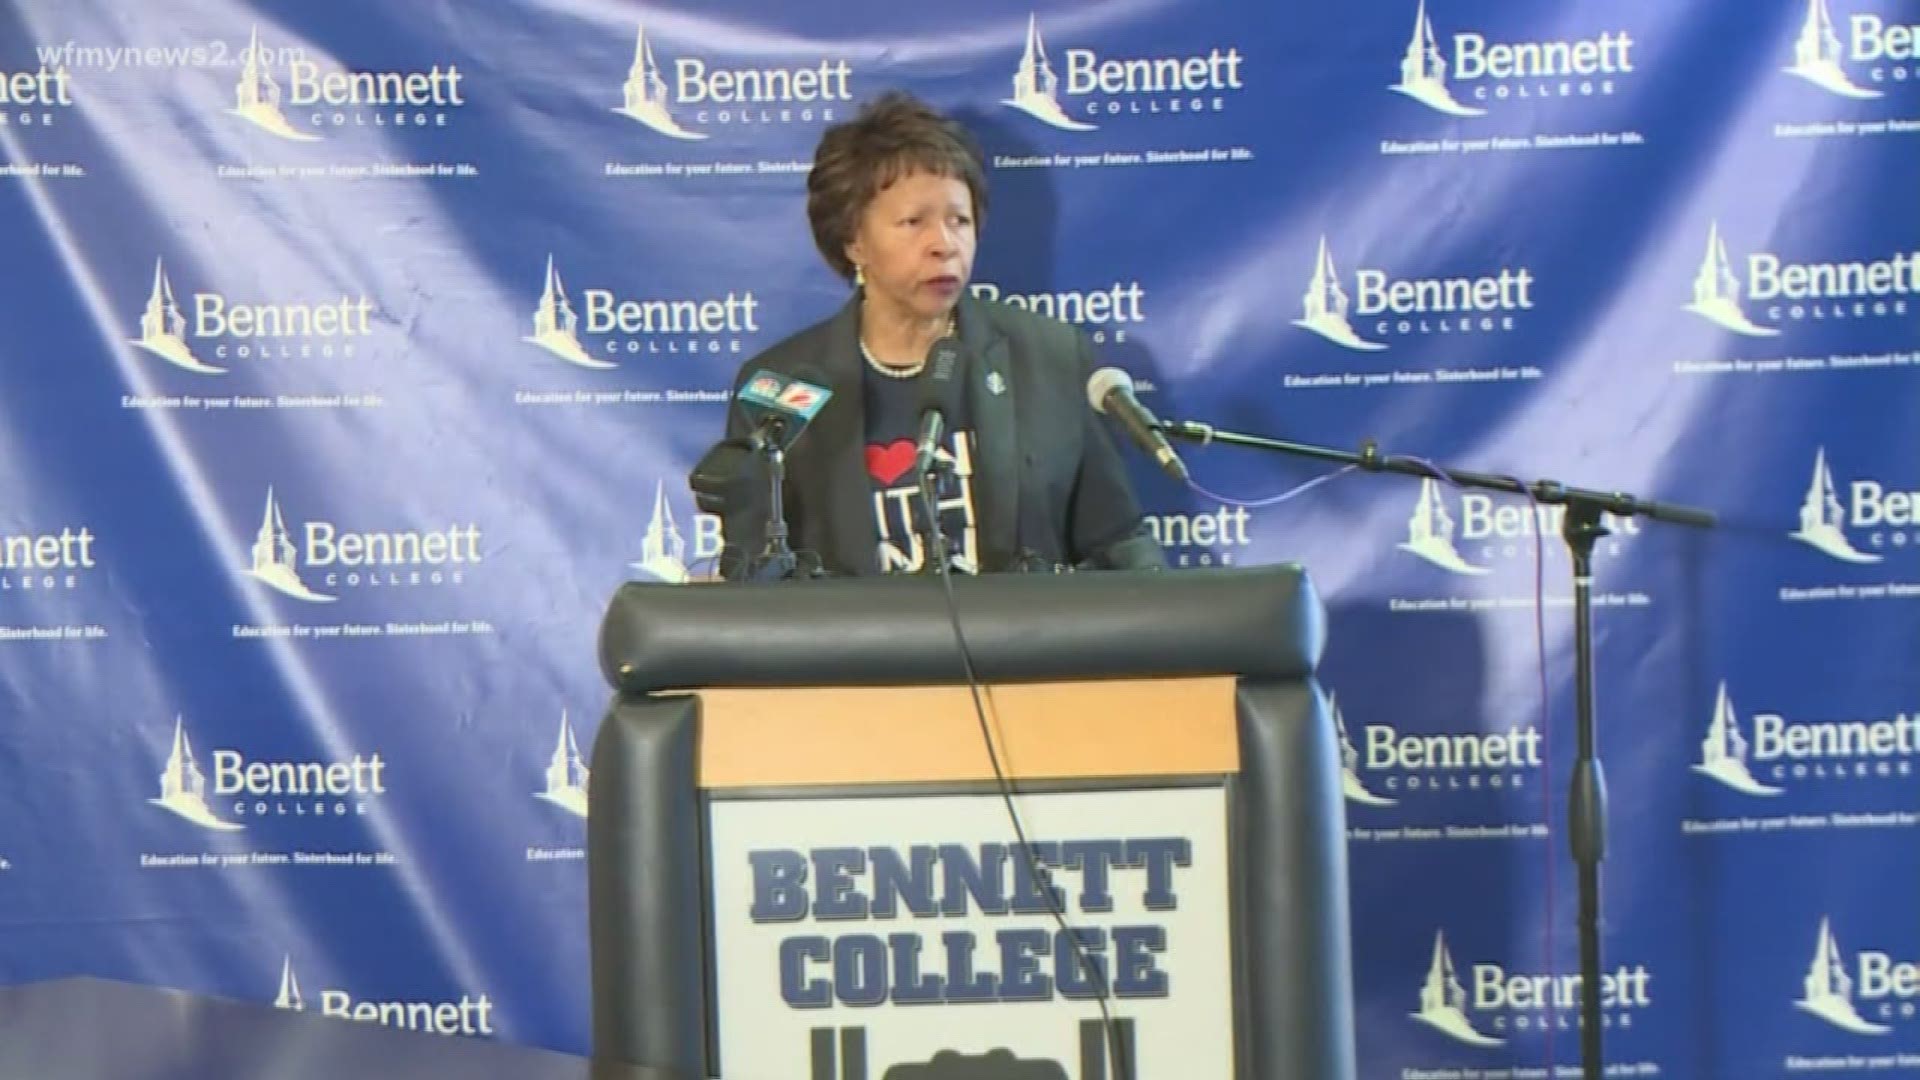 A long road for Bennett College in Greensboro- they have one more week left to raise 5 million dollars or lose  their accreditation.